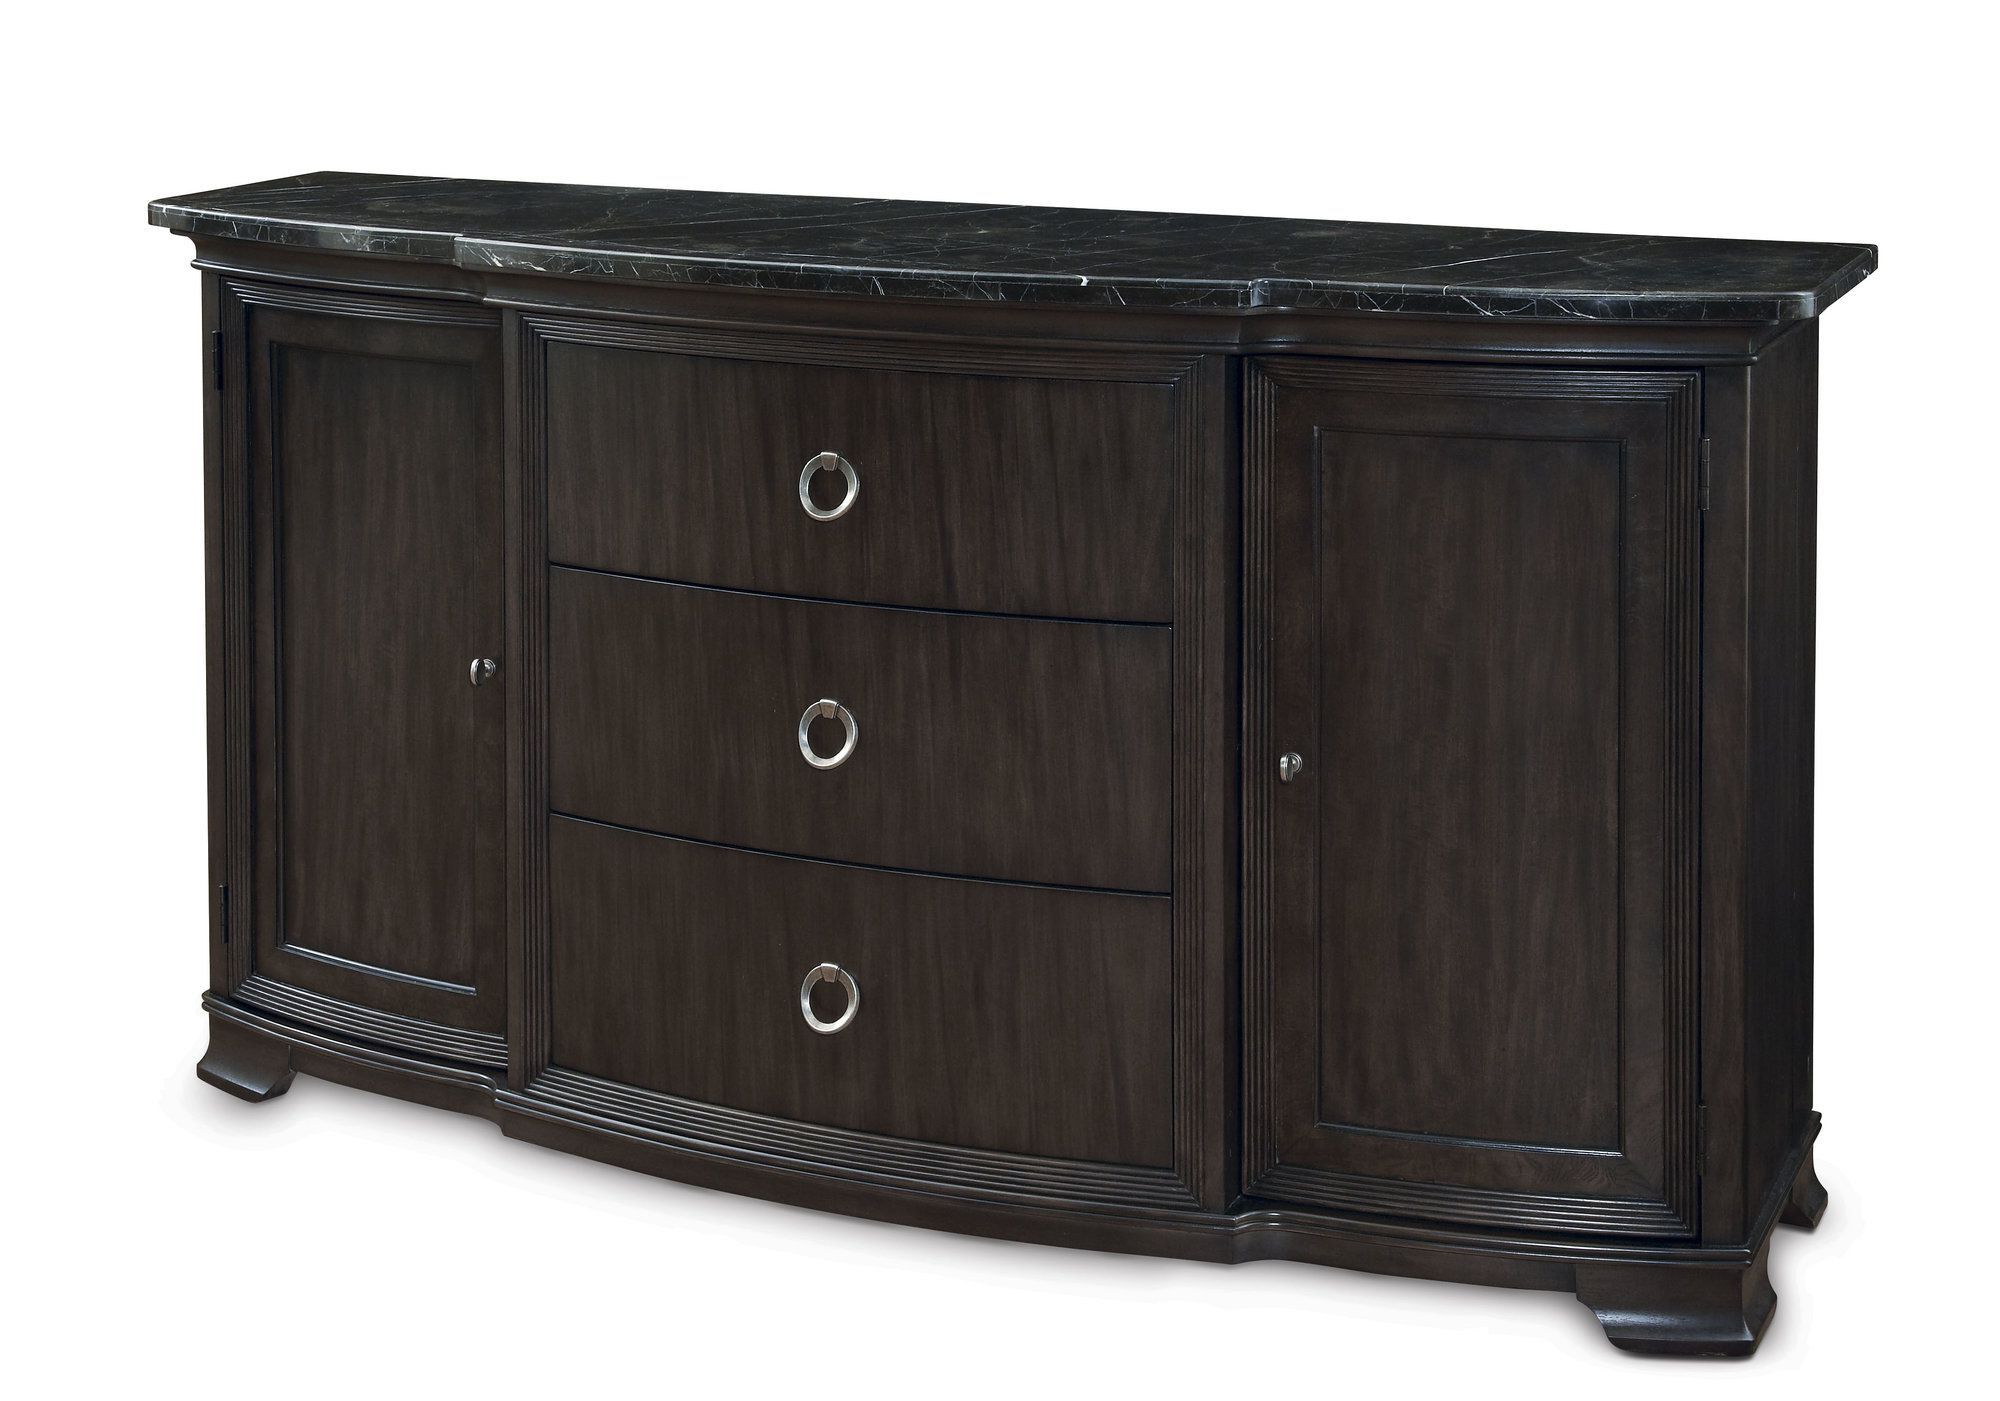 Optum Buffet | Products | Furniture, Buffet, Sideboard Buffet Inside Keiko Modern Bookmatch Sideboards (View 10 of 20)